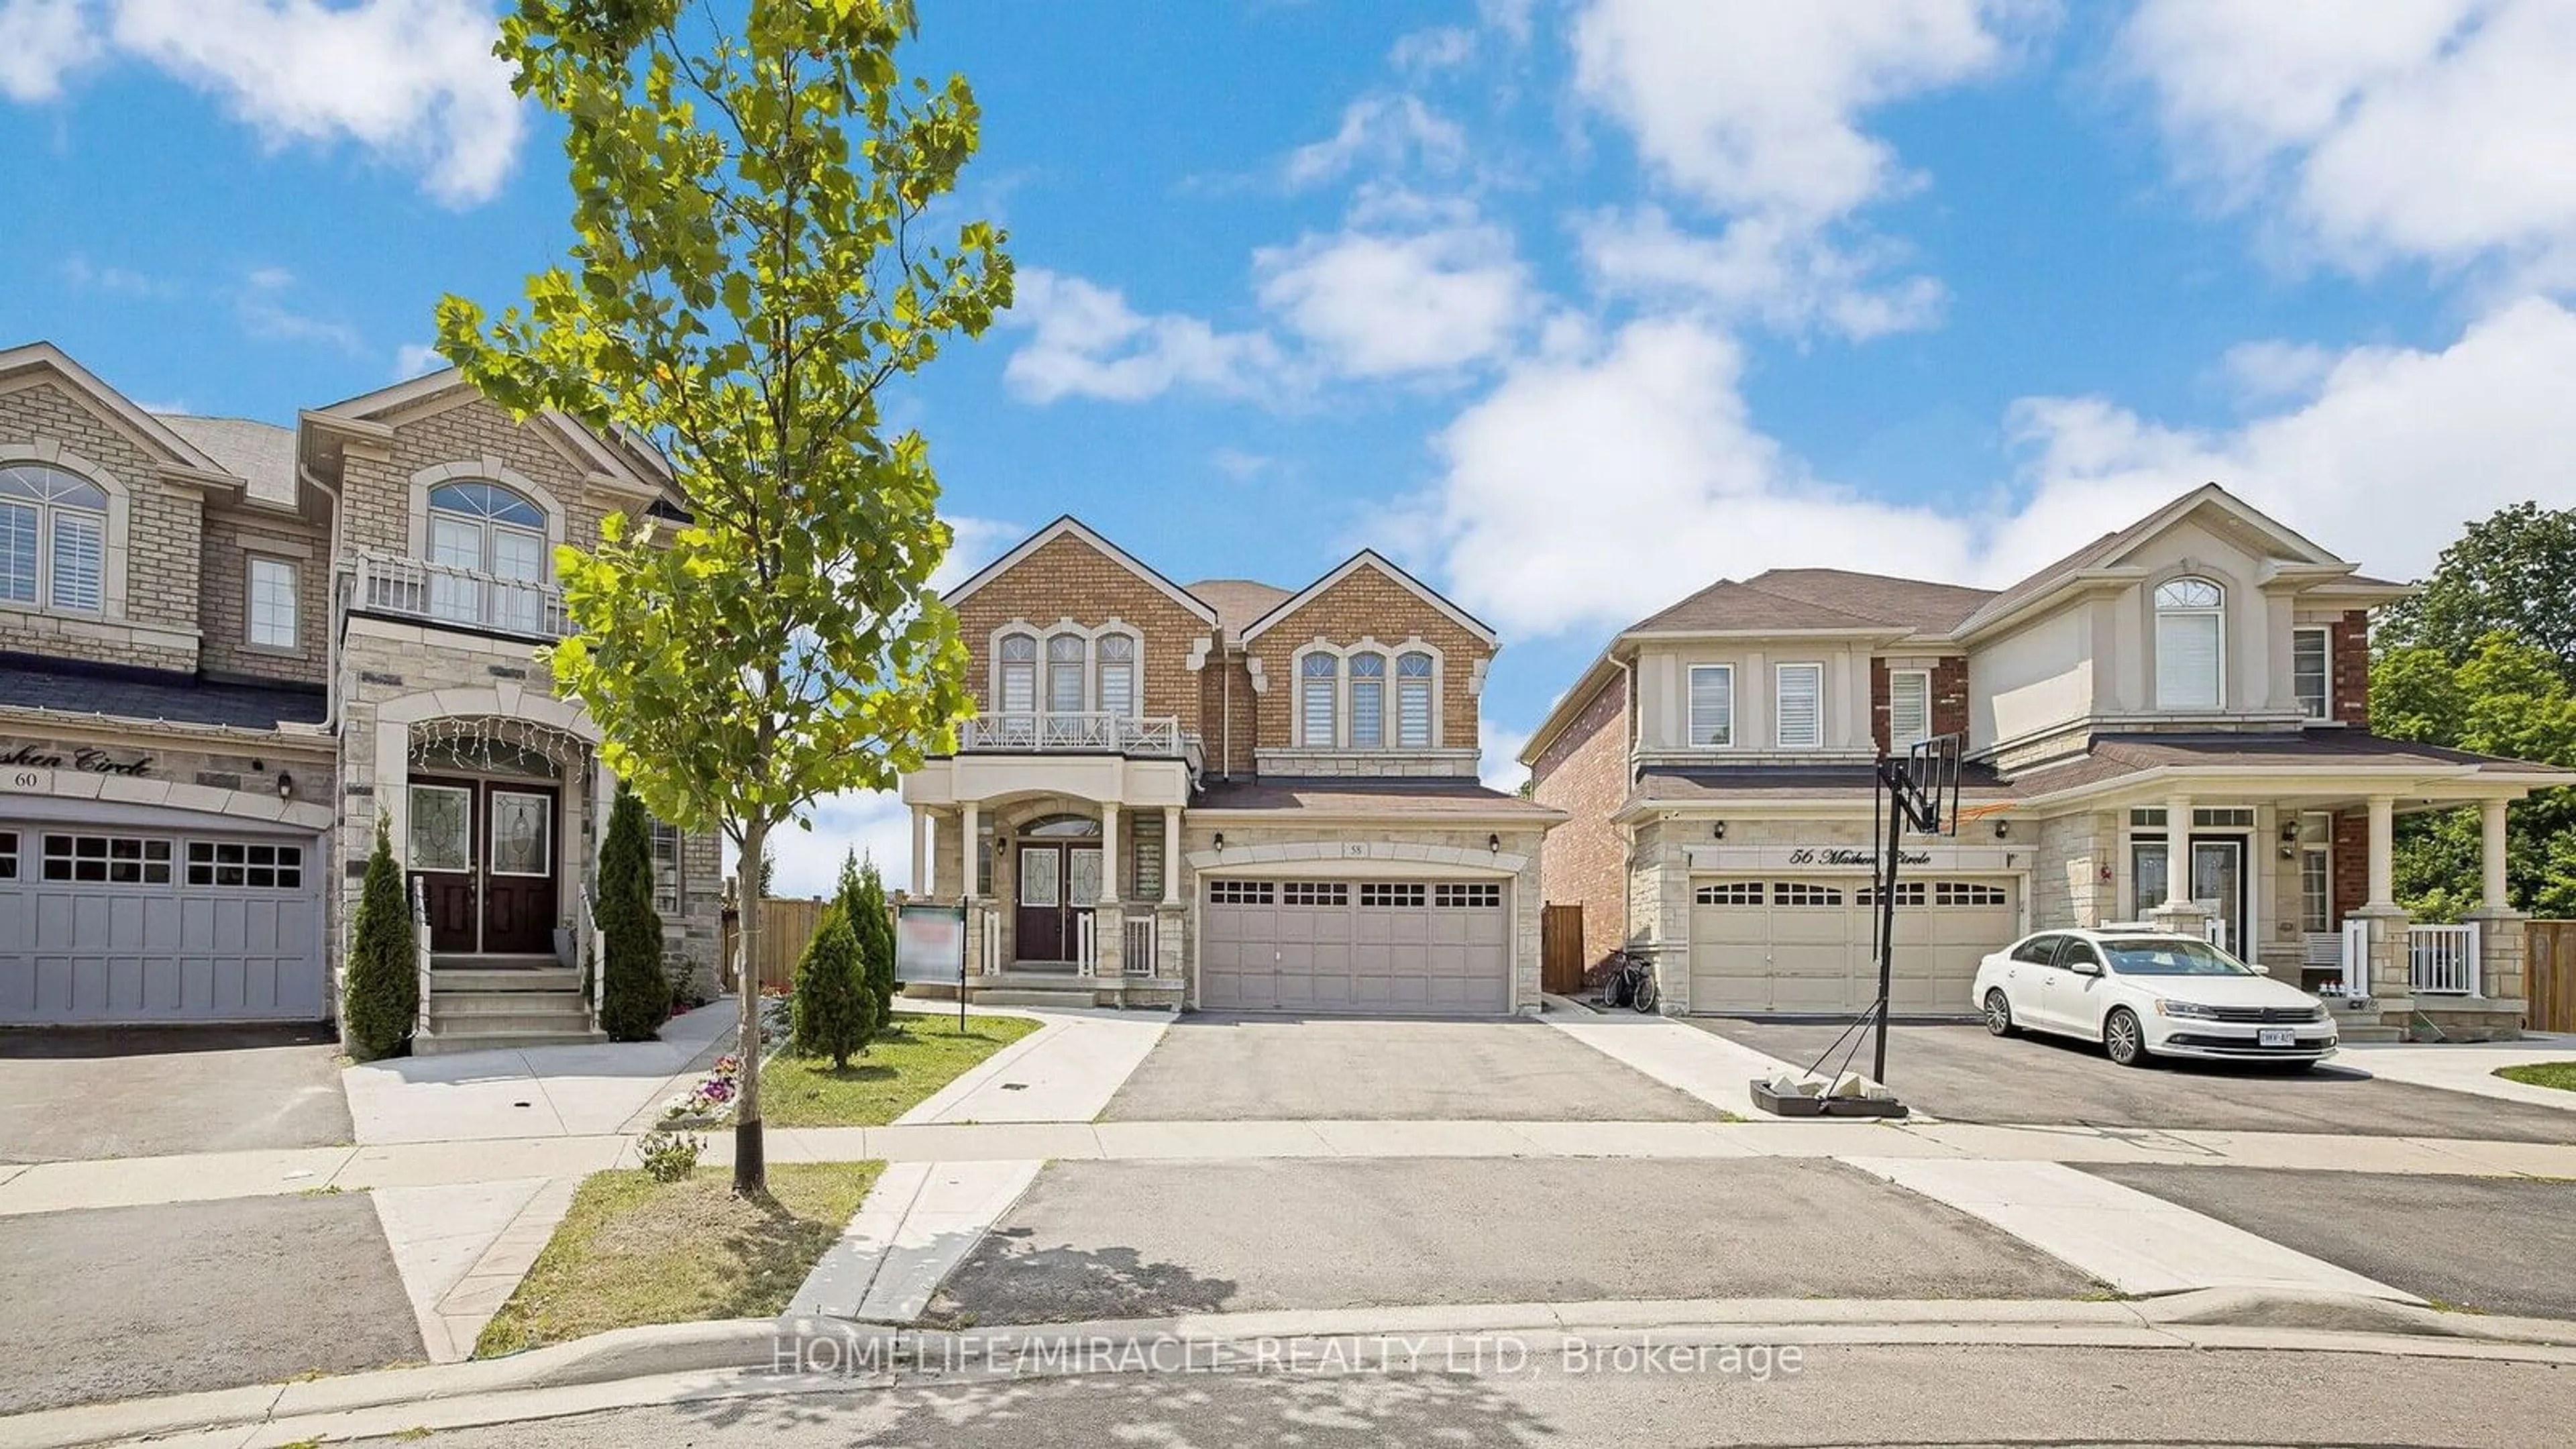 Frontside or backside of a home for 58 Masken Circ, Brampton Ontario L7A 4K3